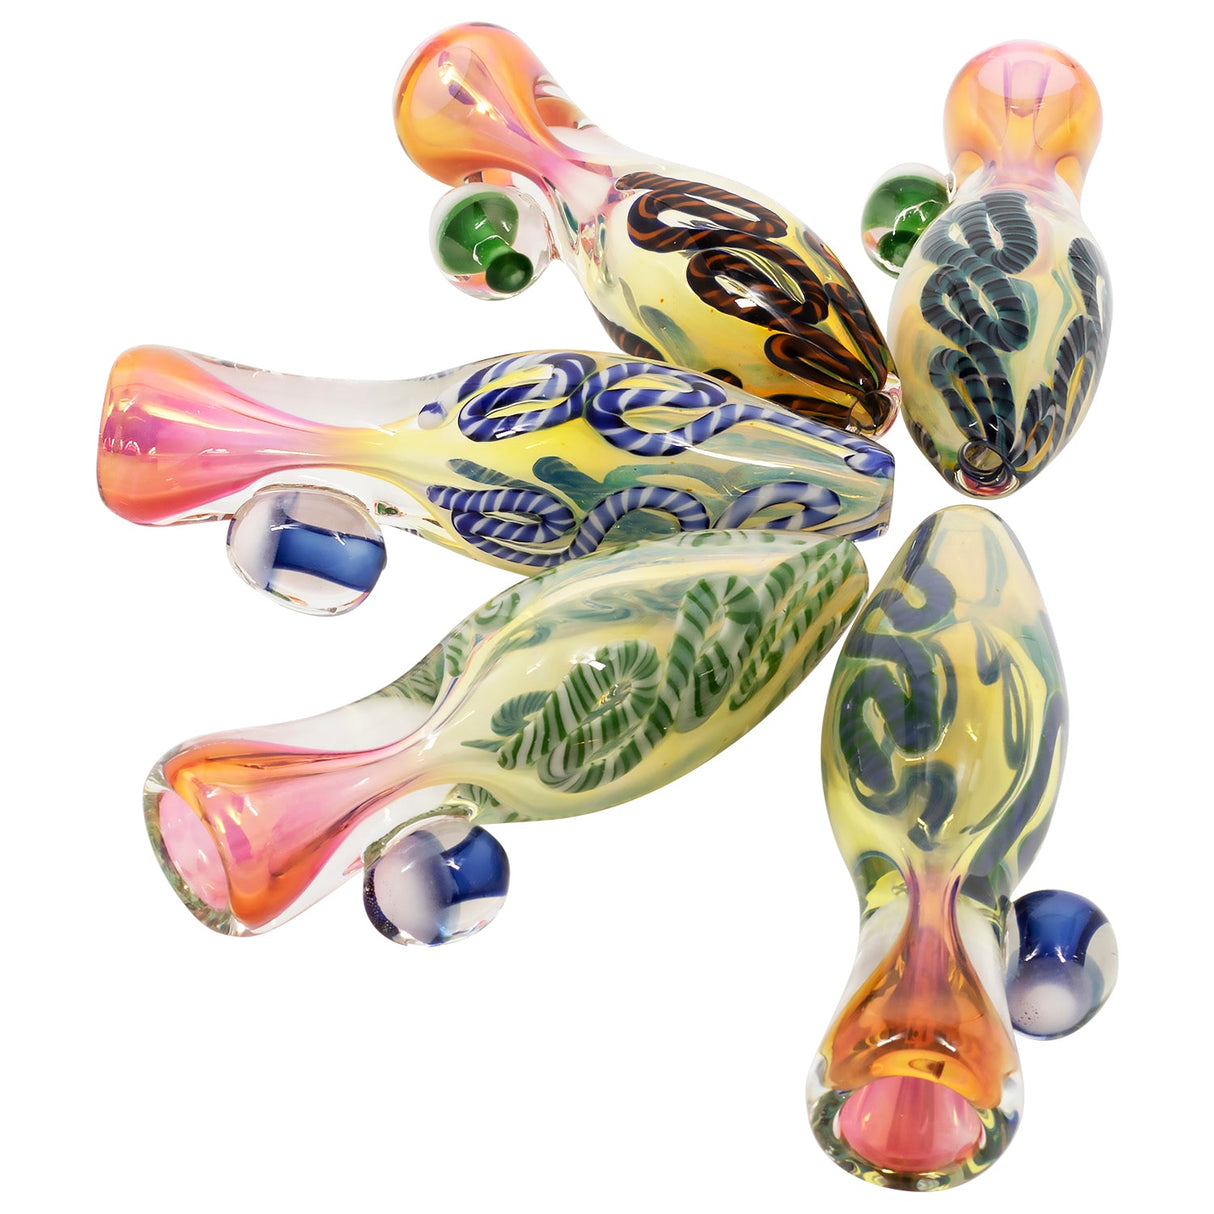 LA Pipes "Fun-Guy" Glass Chillums with fumed color changing design, top view